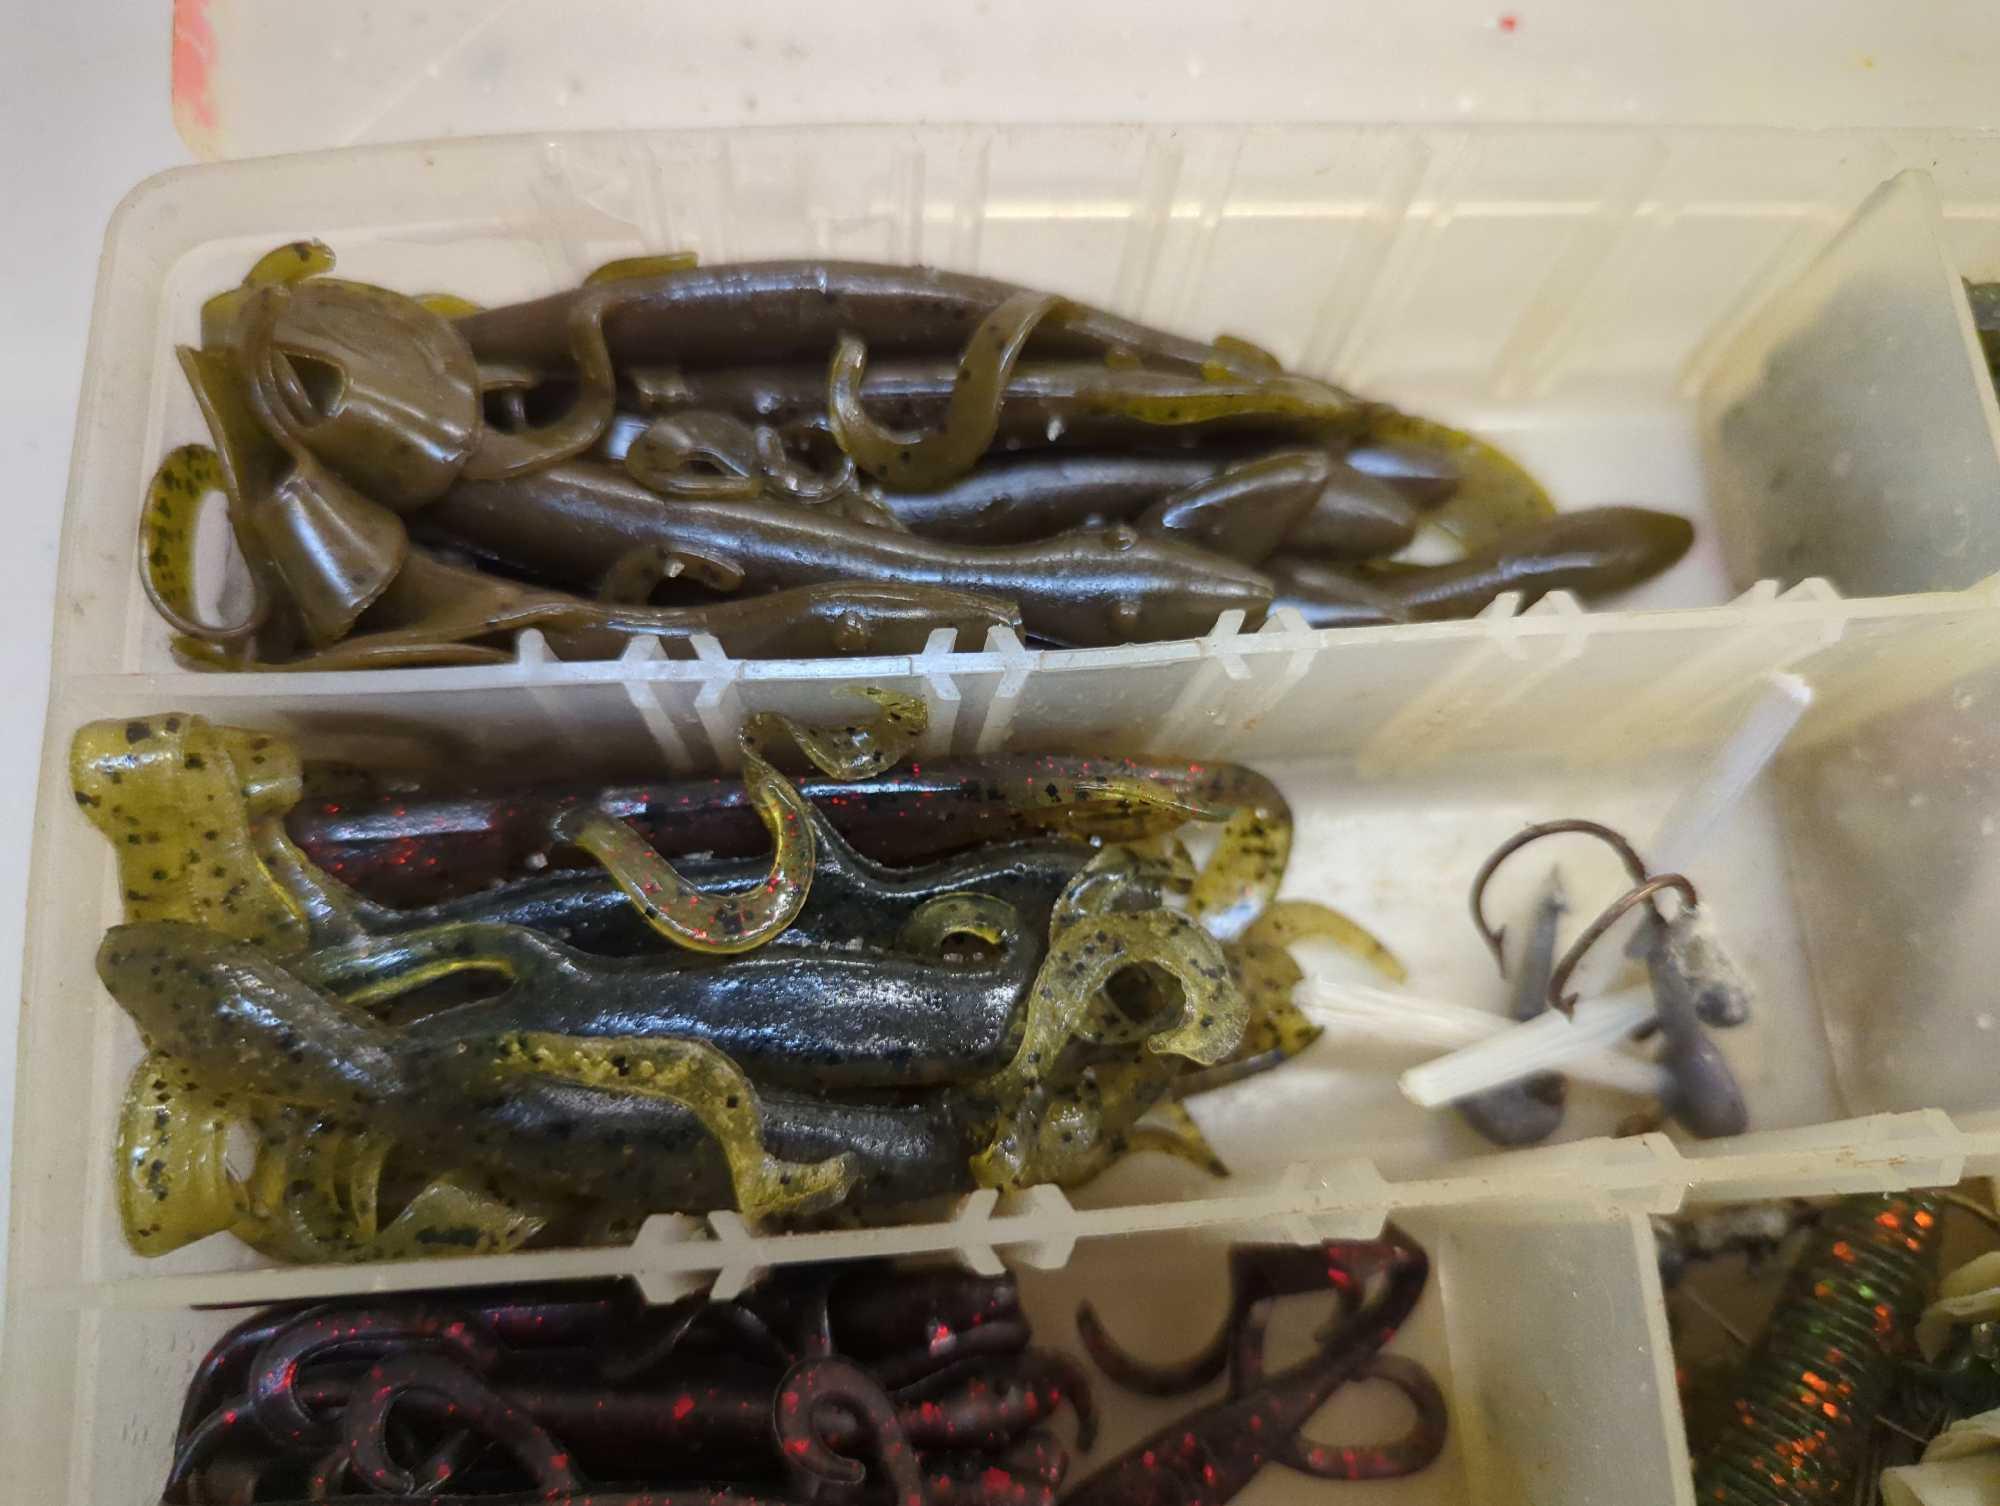 Tackle Box and contents including various worm fishing lures. Comes as is shown in photos. Appears